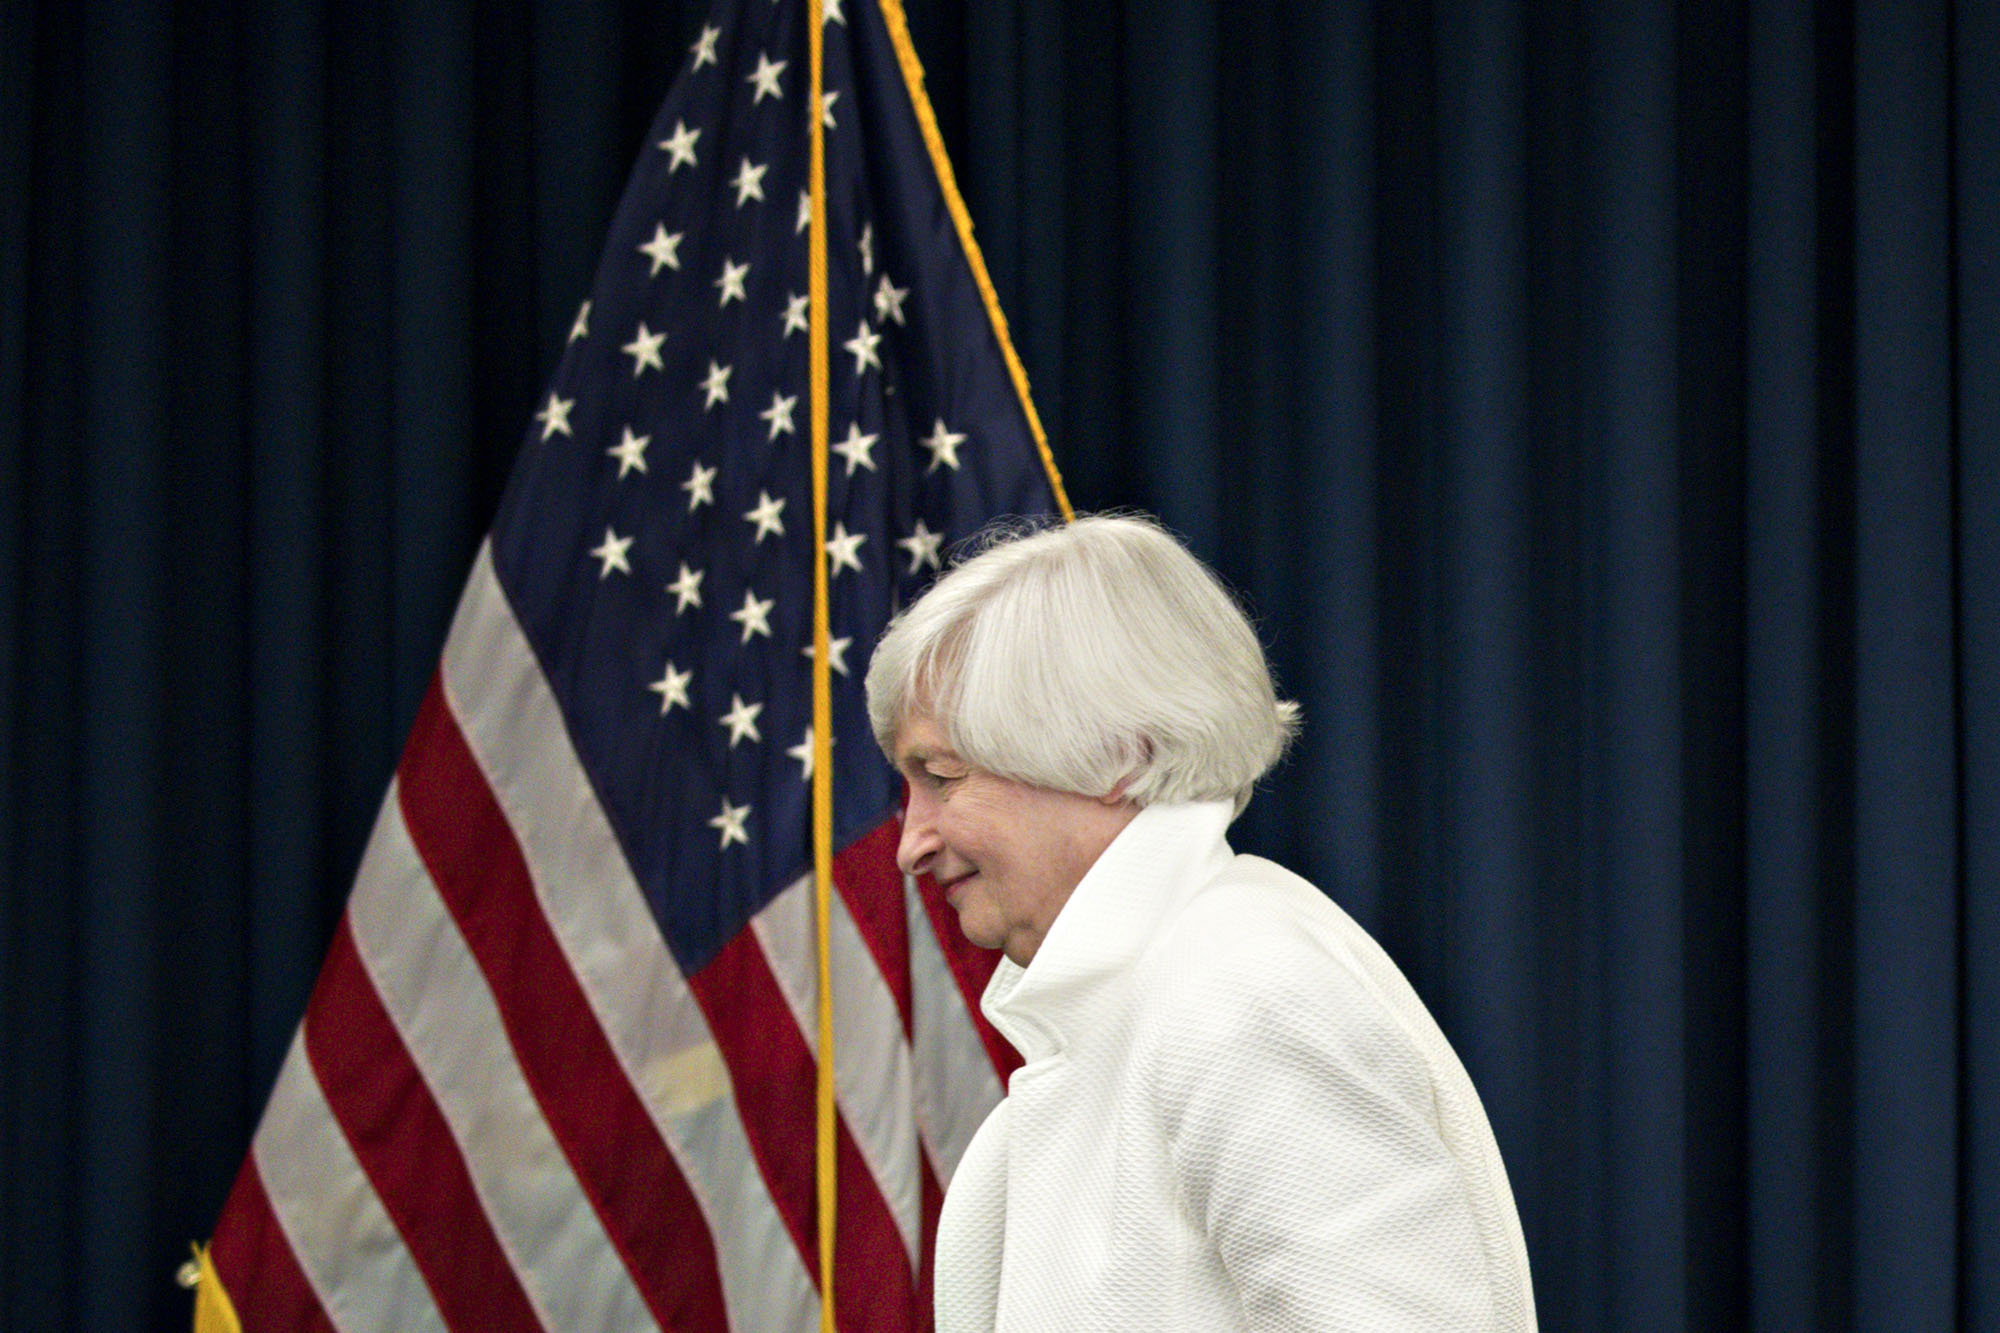 Janet Yellen, chair of the U.S. Federal Reserve, exits a news conference in Washington after announcing that the Fed will begin shrinking a &#36;4.5 trillion stockpile of assets, moving to unwind a pillar of crisis-era economic support. | BLOOMBERG